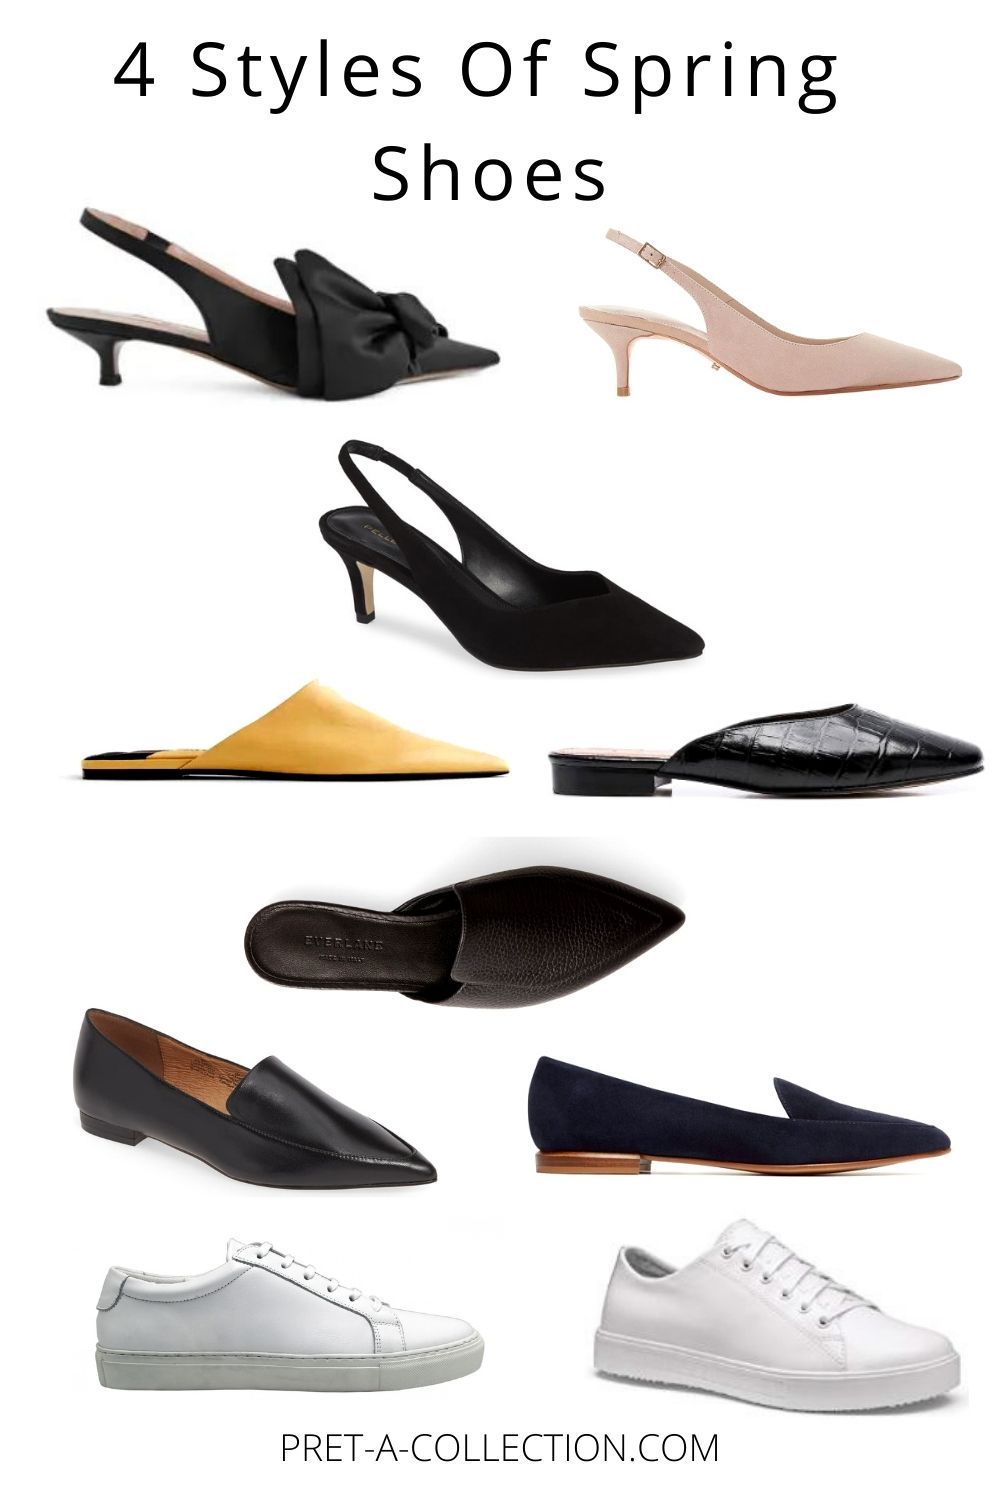 4 Styles Of Spring Shoes - Pret a Collection